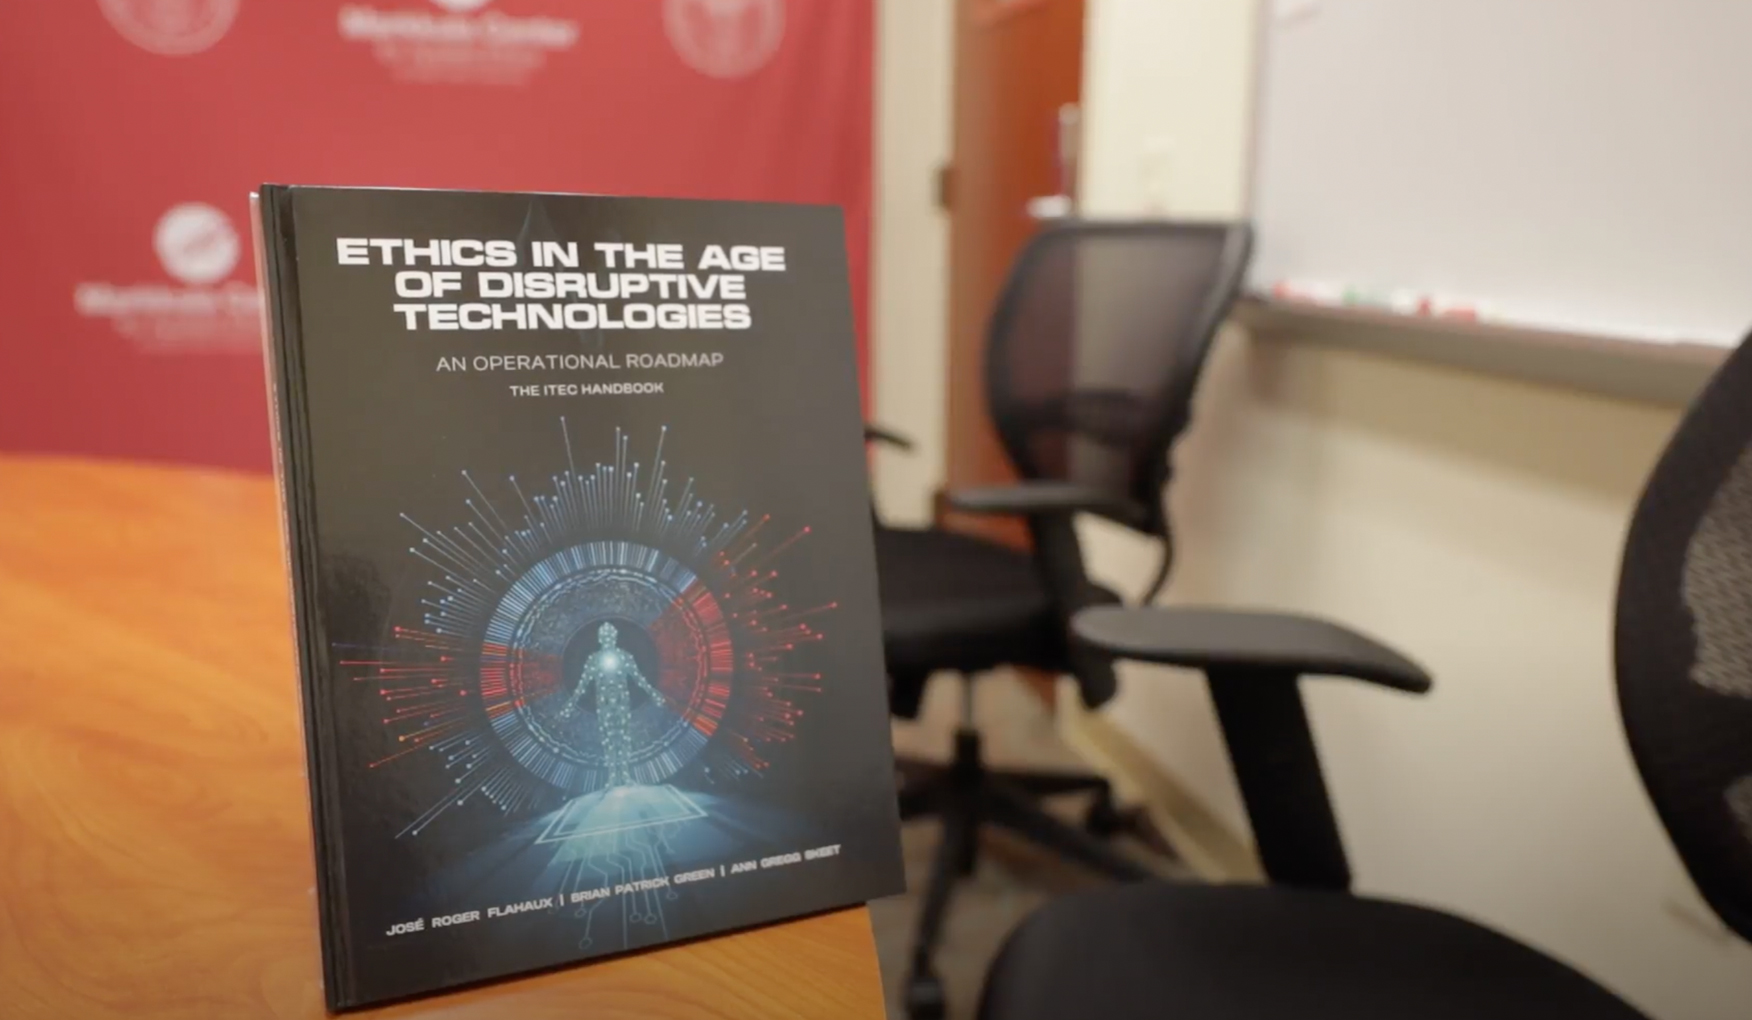 A book titled 'Ethics in the Age of Disruptive Technologies: An Operational Roadmap' by Jose Ruben Ferrete and Luis Gerardo Cabrera is standing upright on a table.